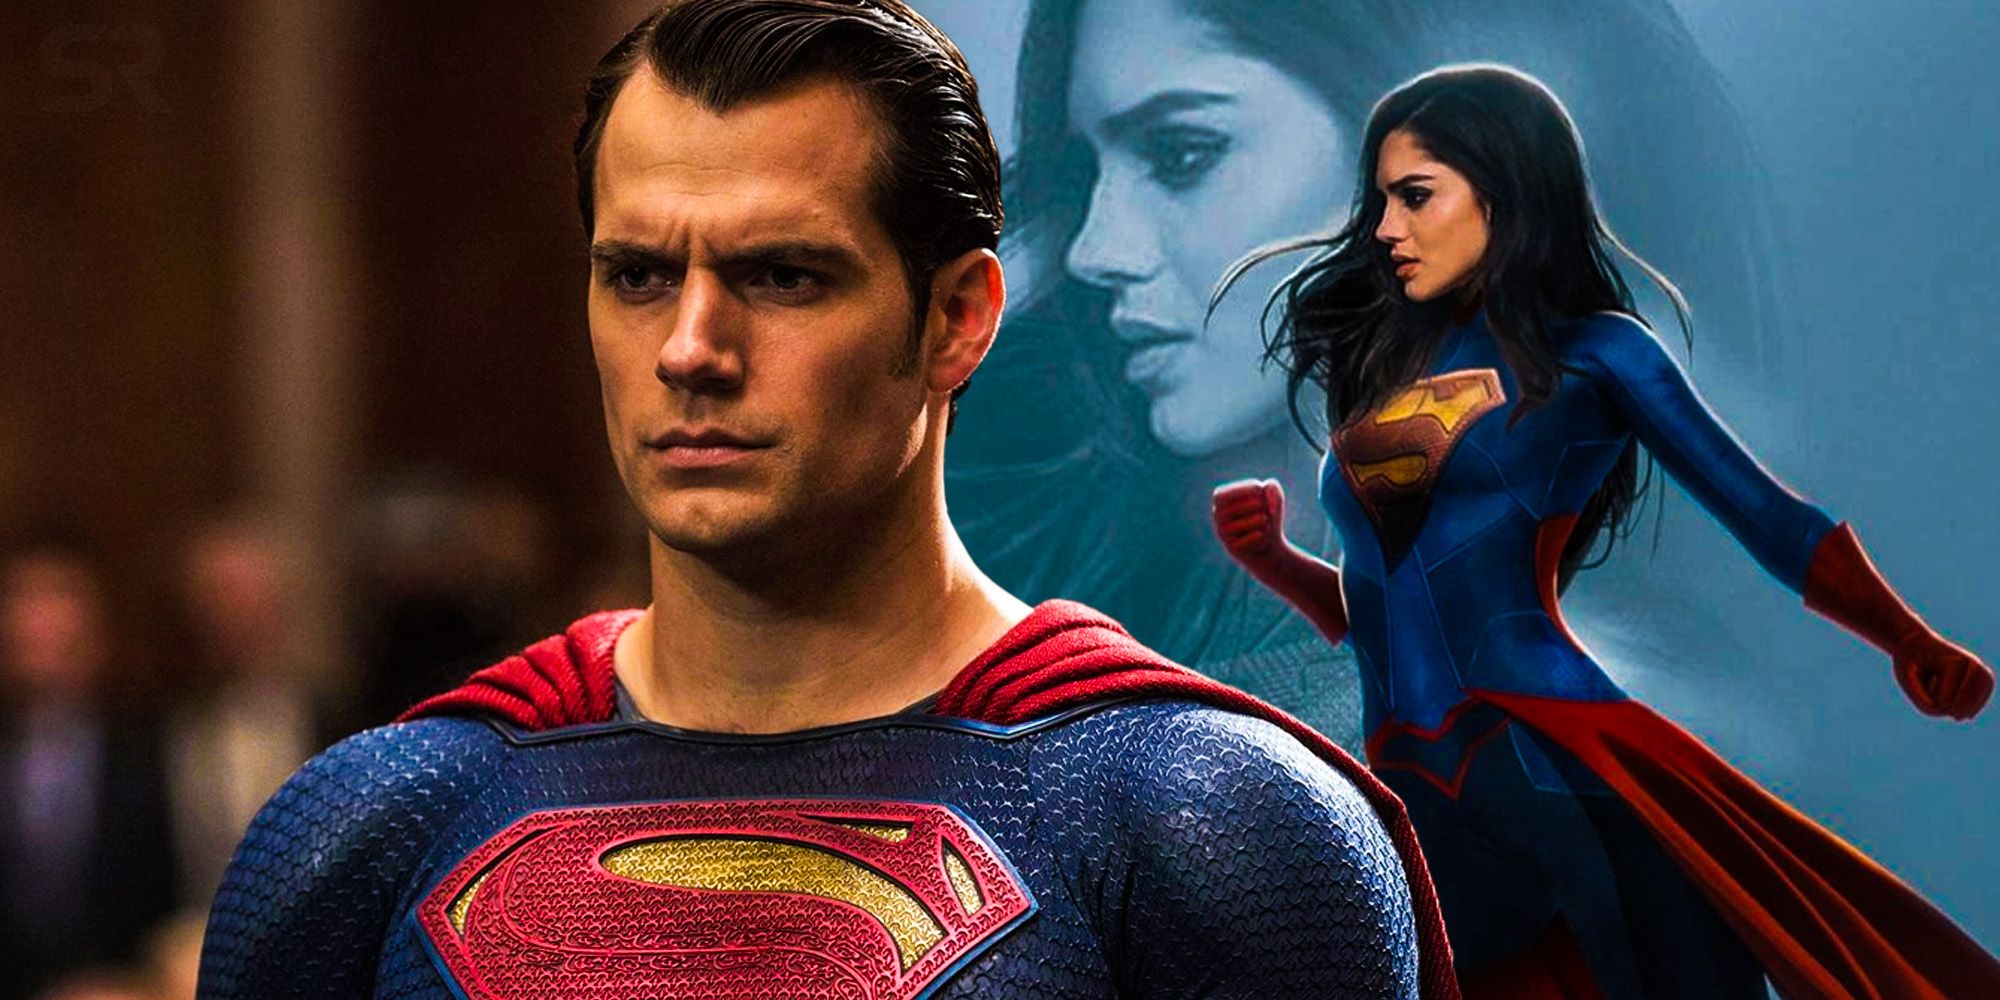 Who is replacing Henry Cavill as Superman?